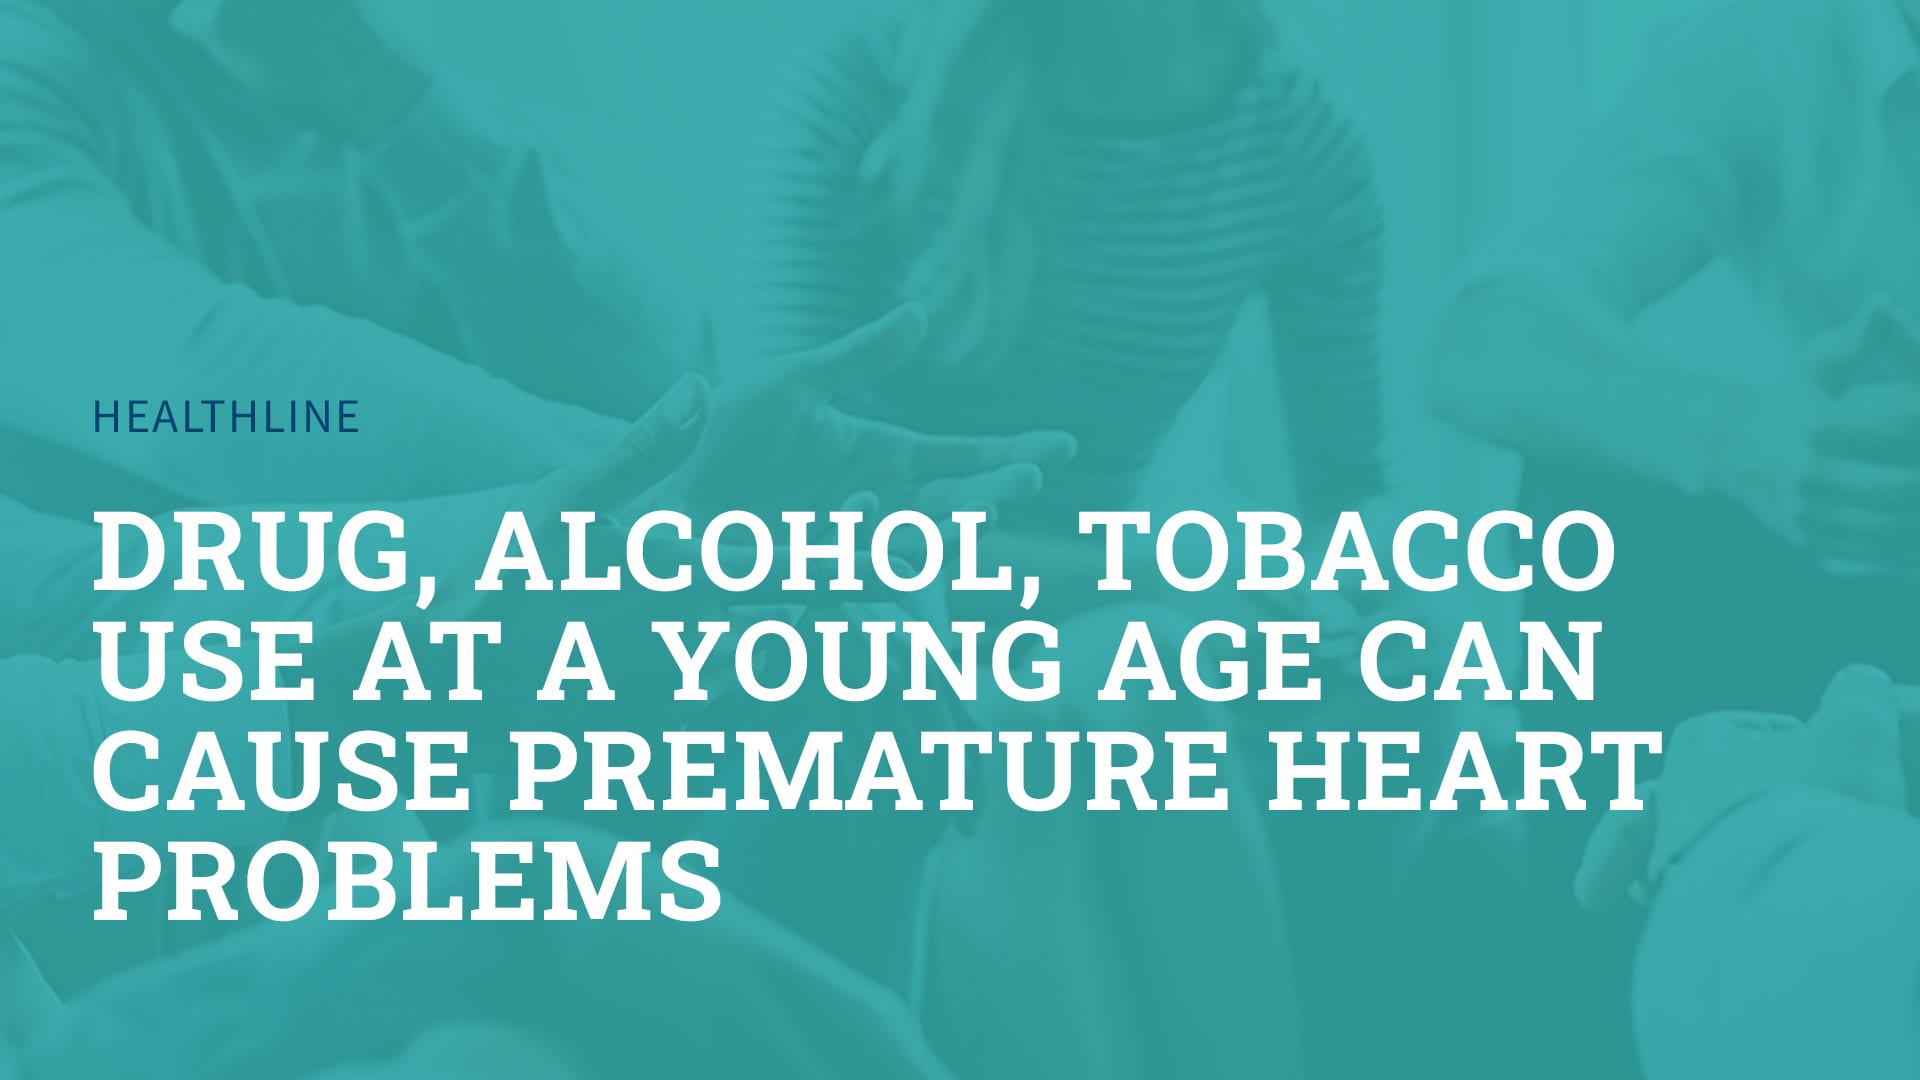 drug, alcohol, tobacco use at a young age can cause premature heart problems